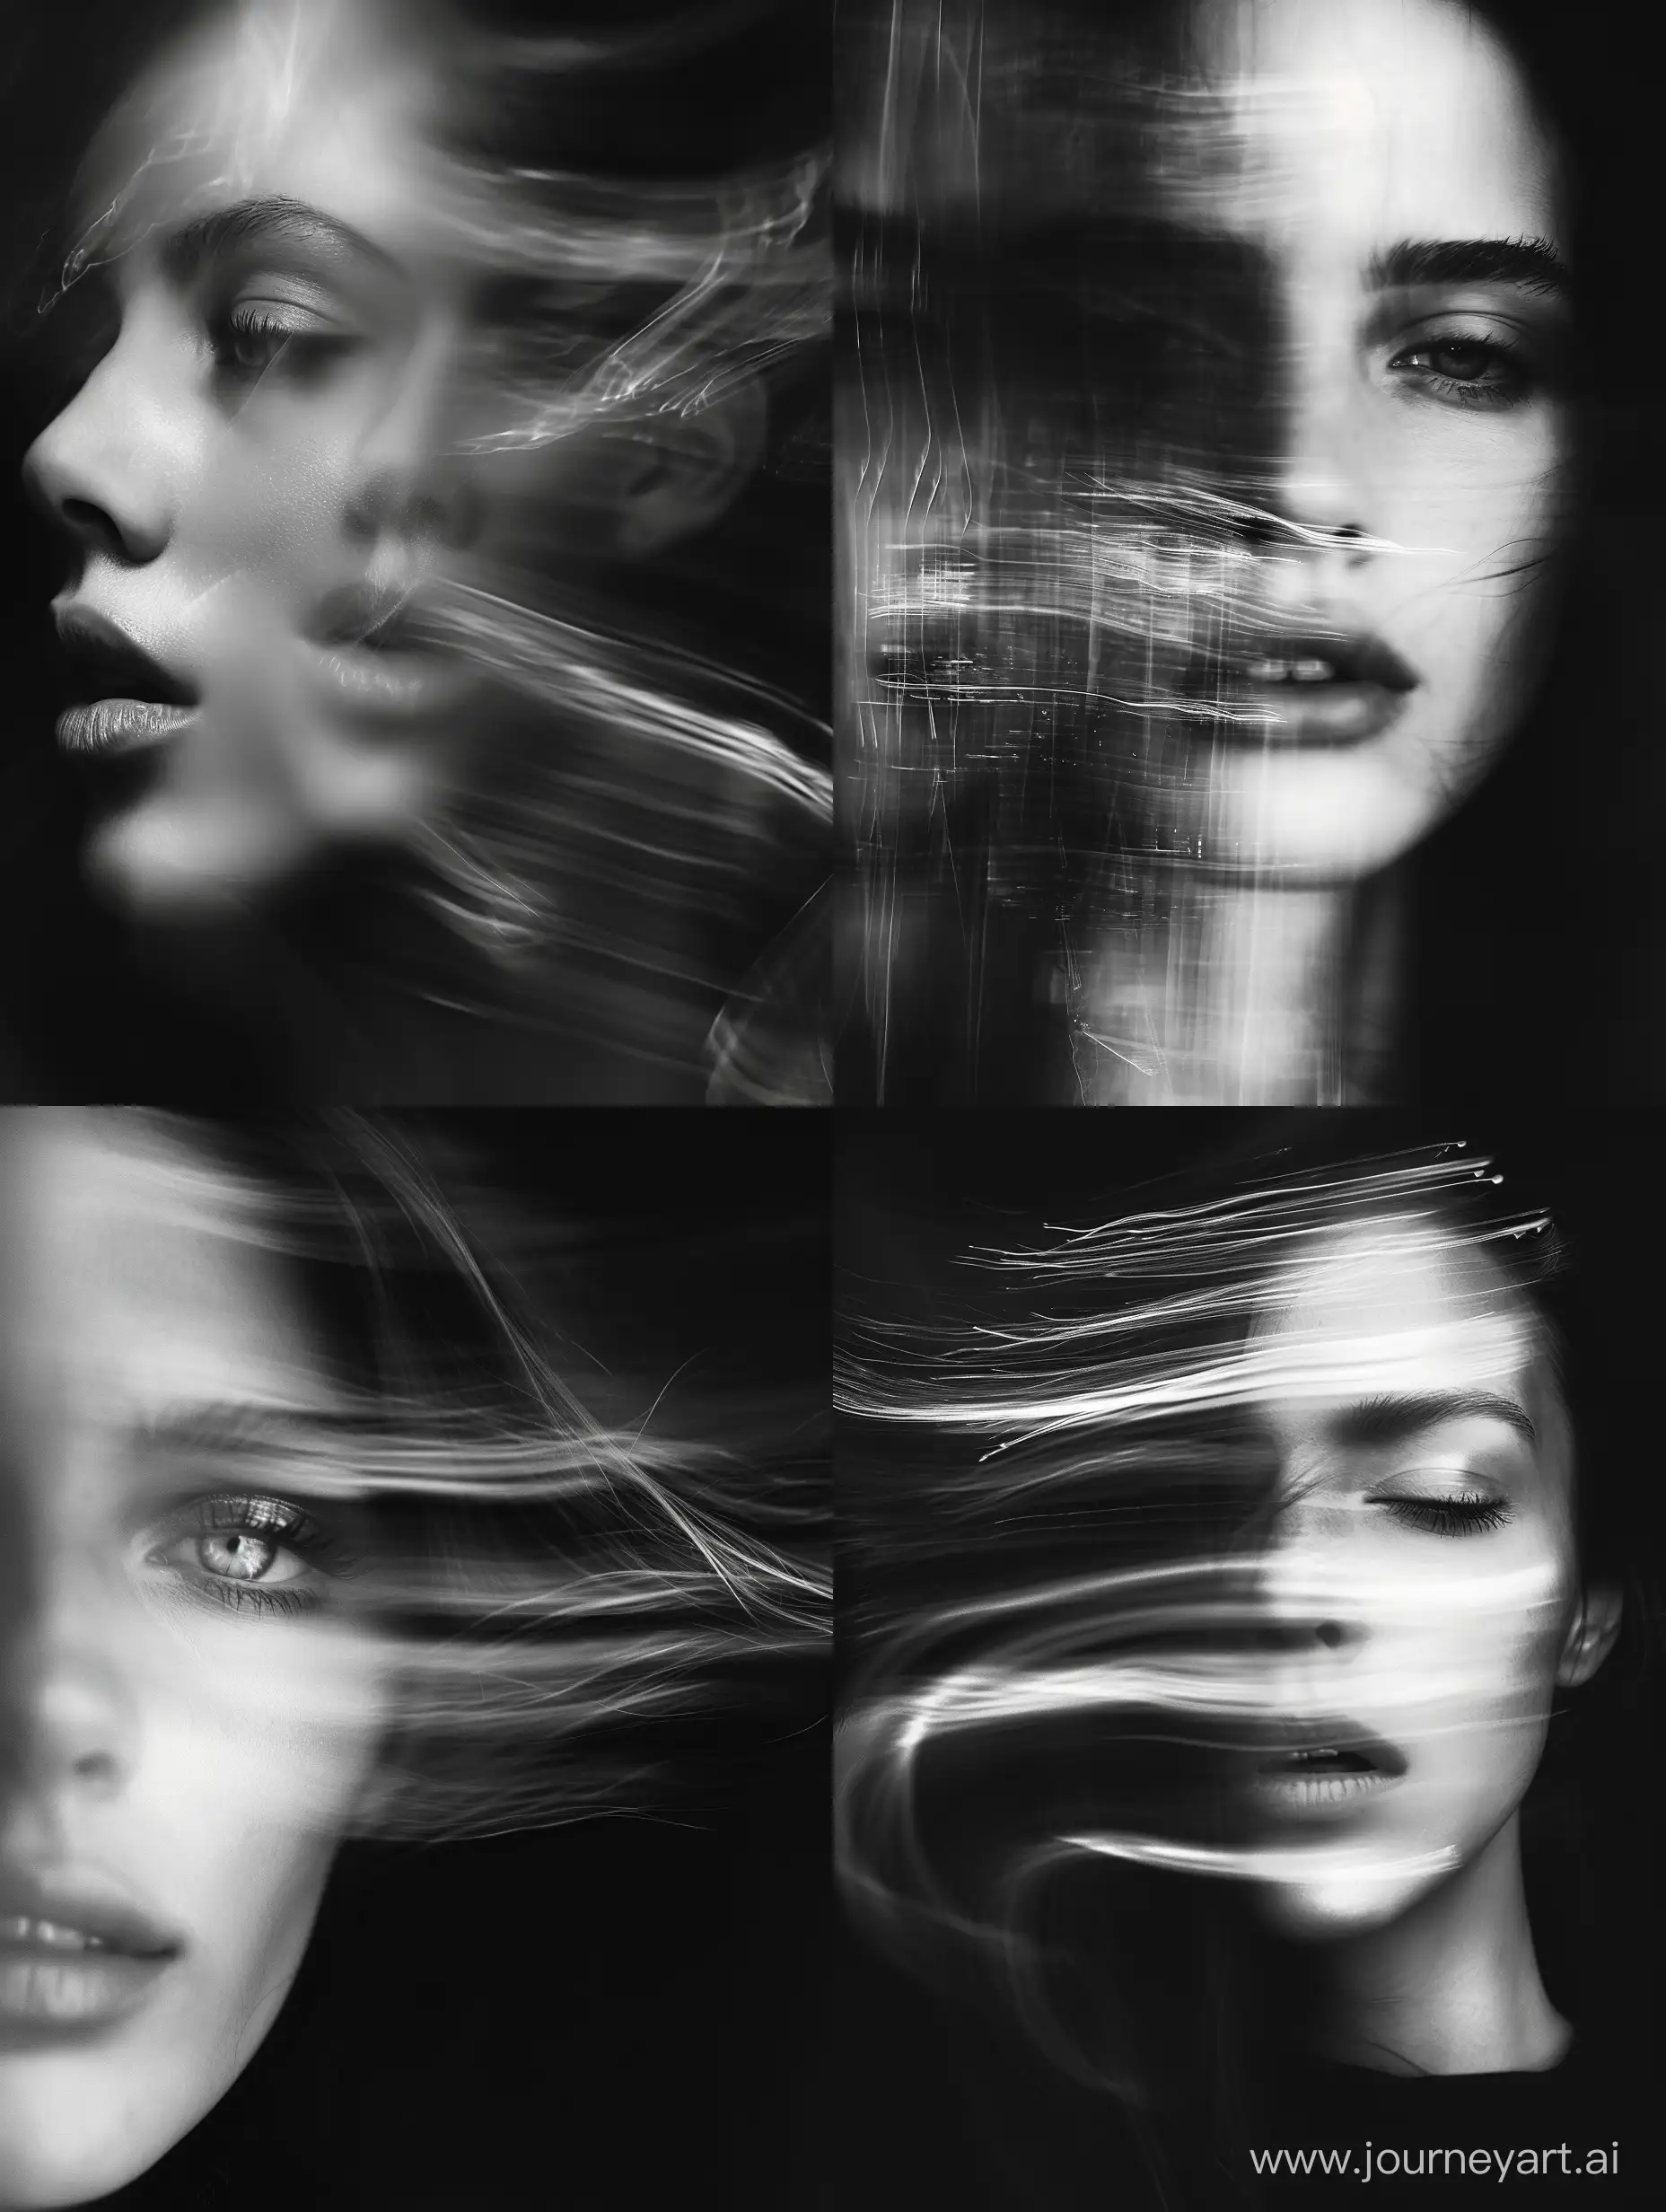  Female face with blurred photographic effect in black and white